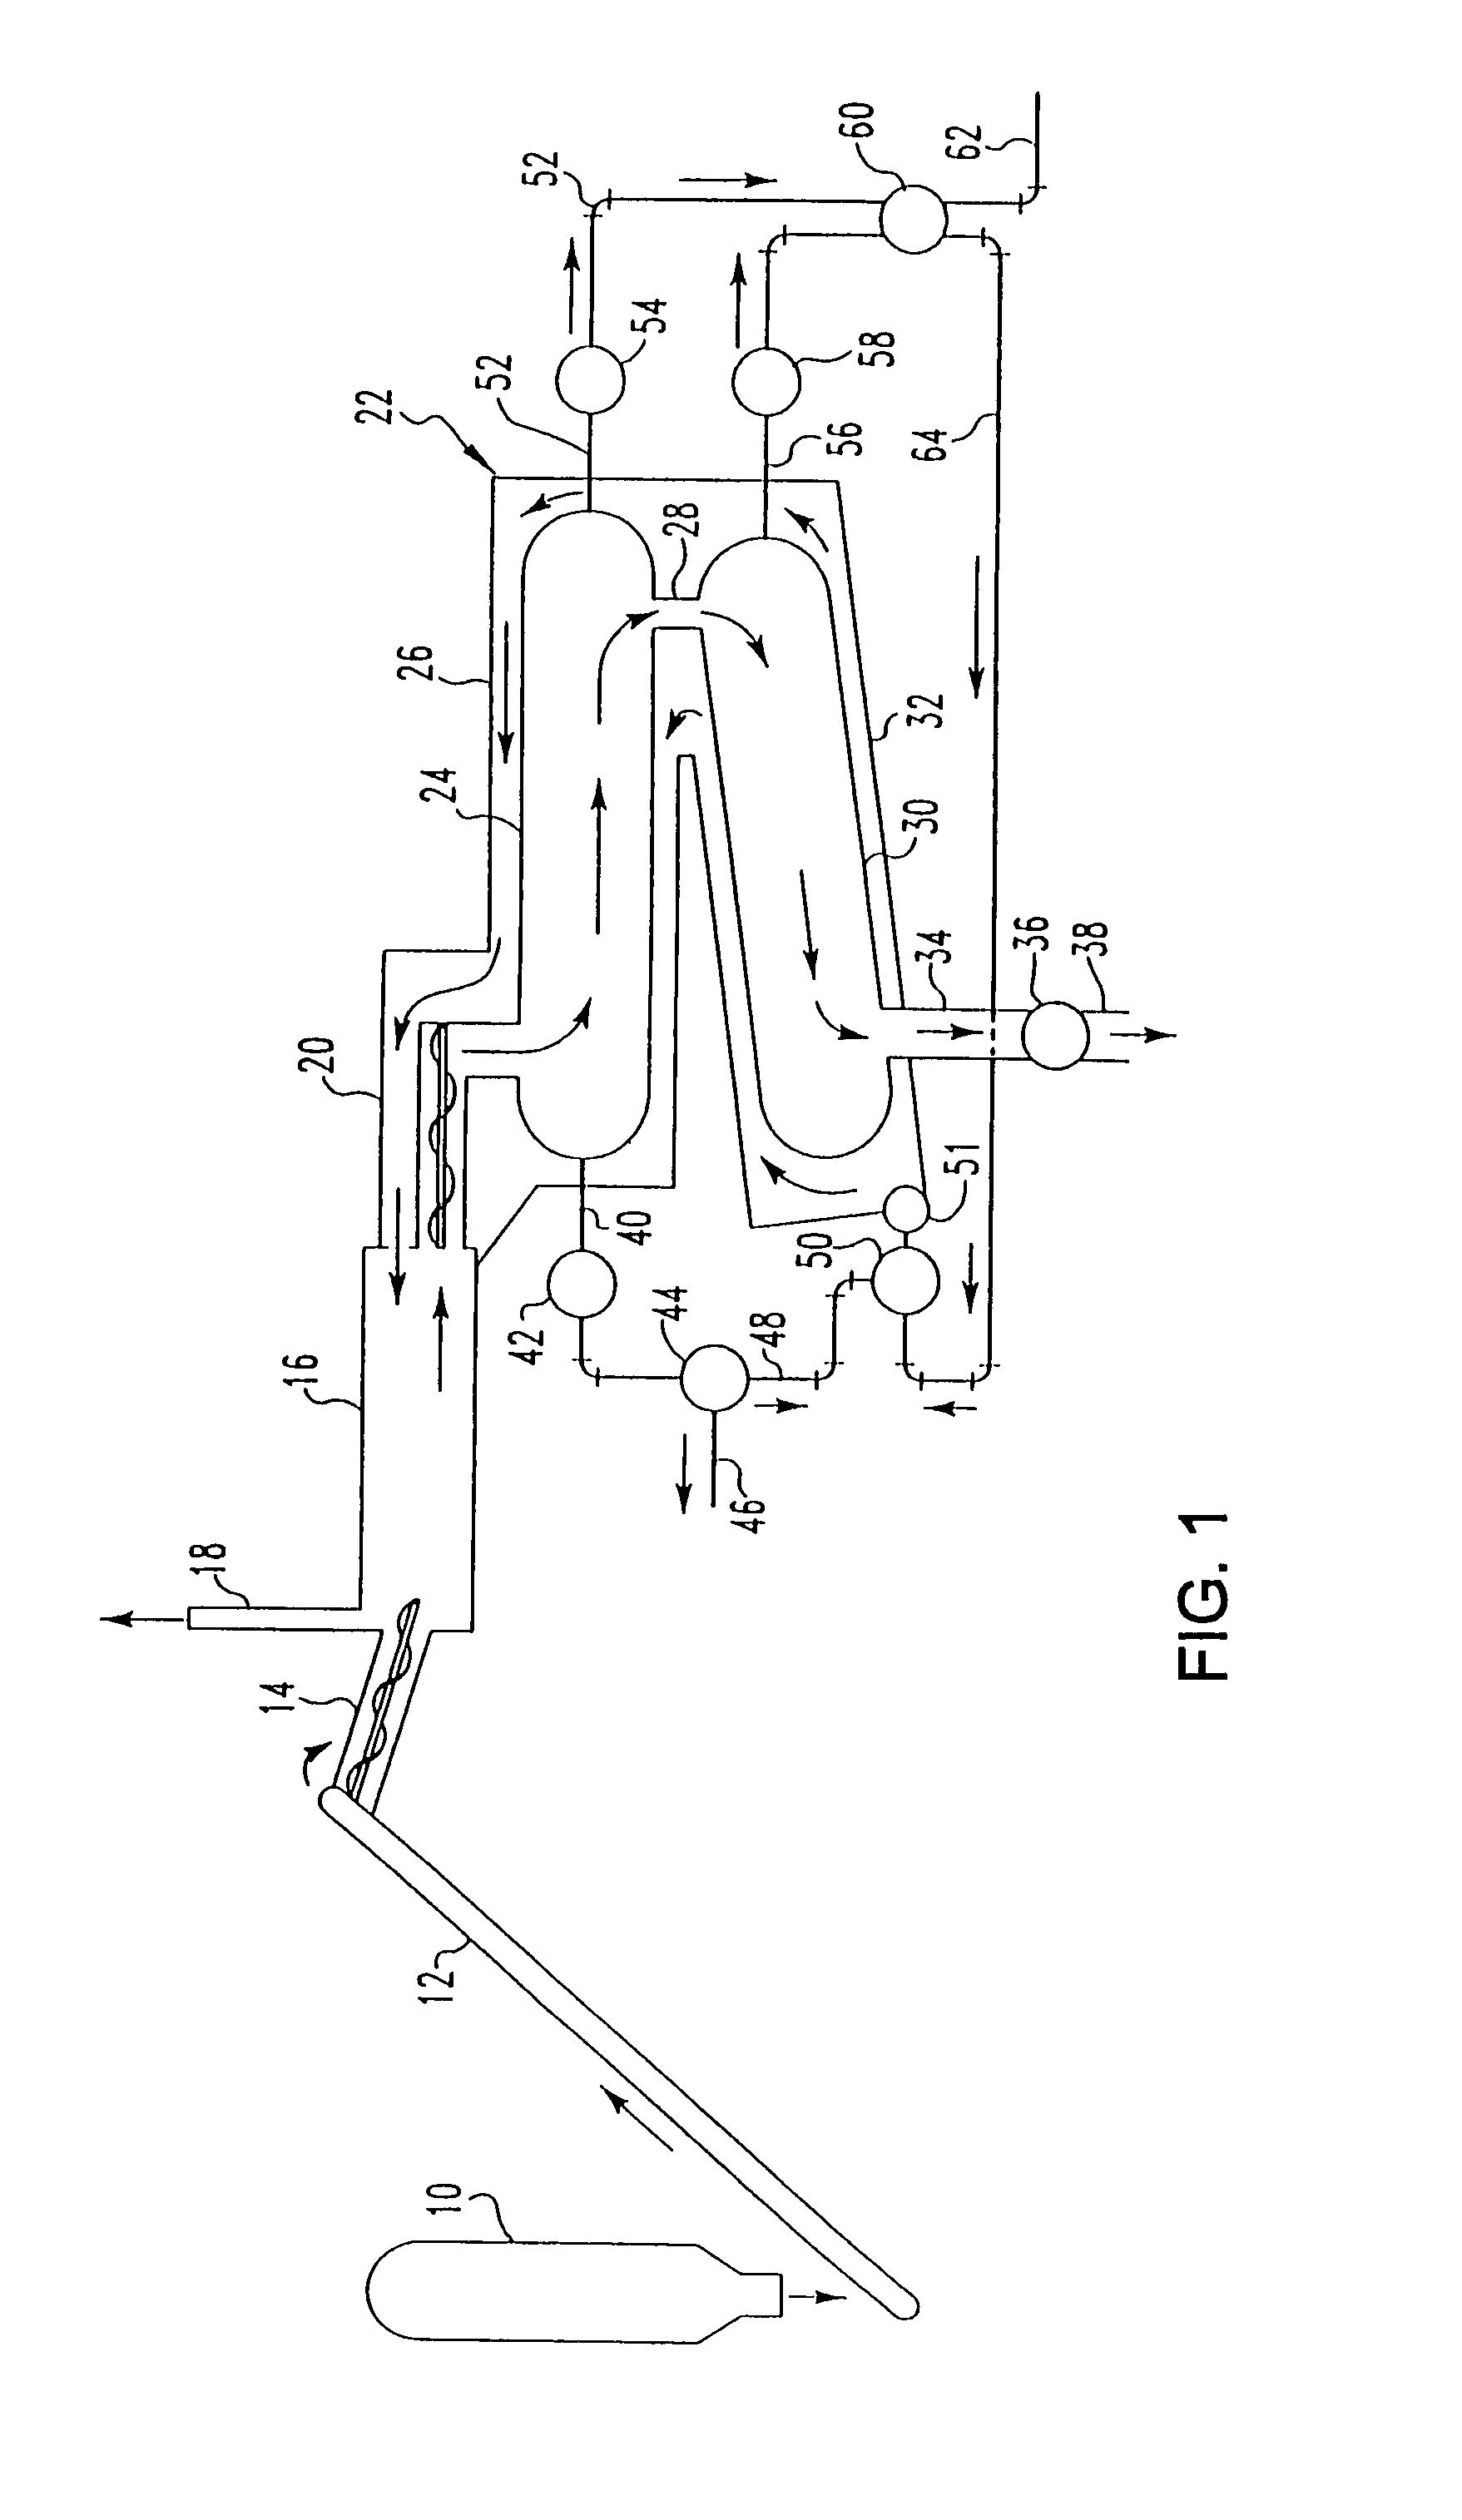 Pyrolytic process for producing enhanced amounts of aromatic compounds